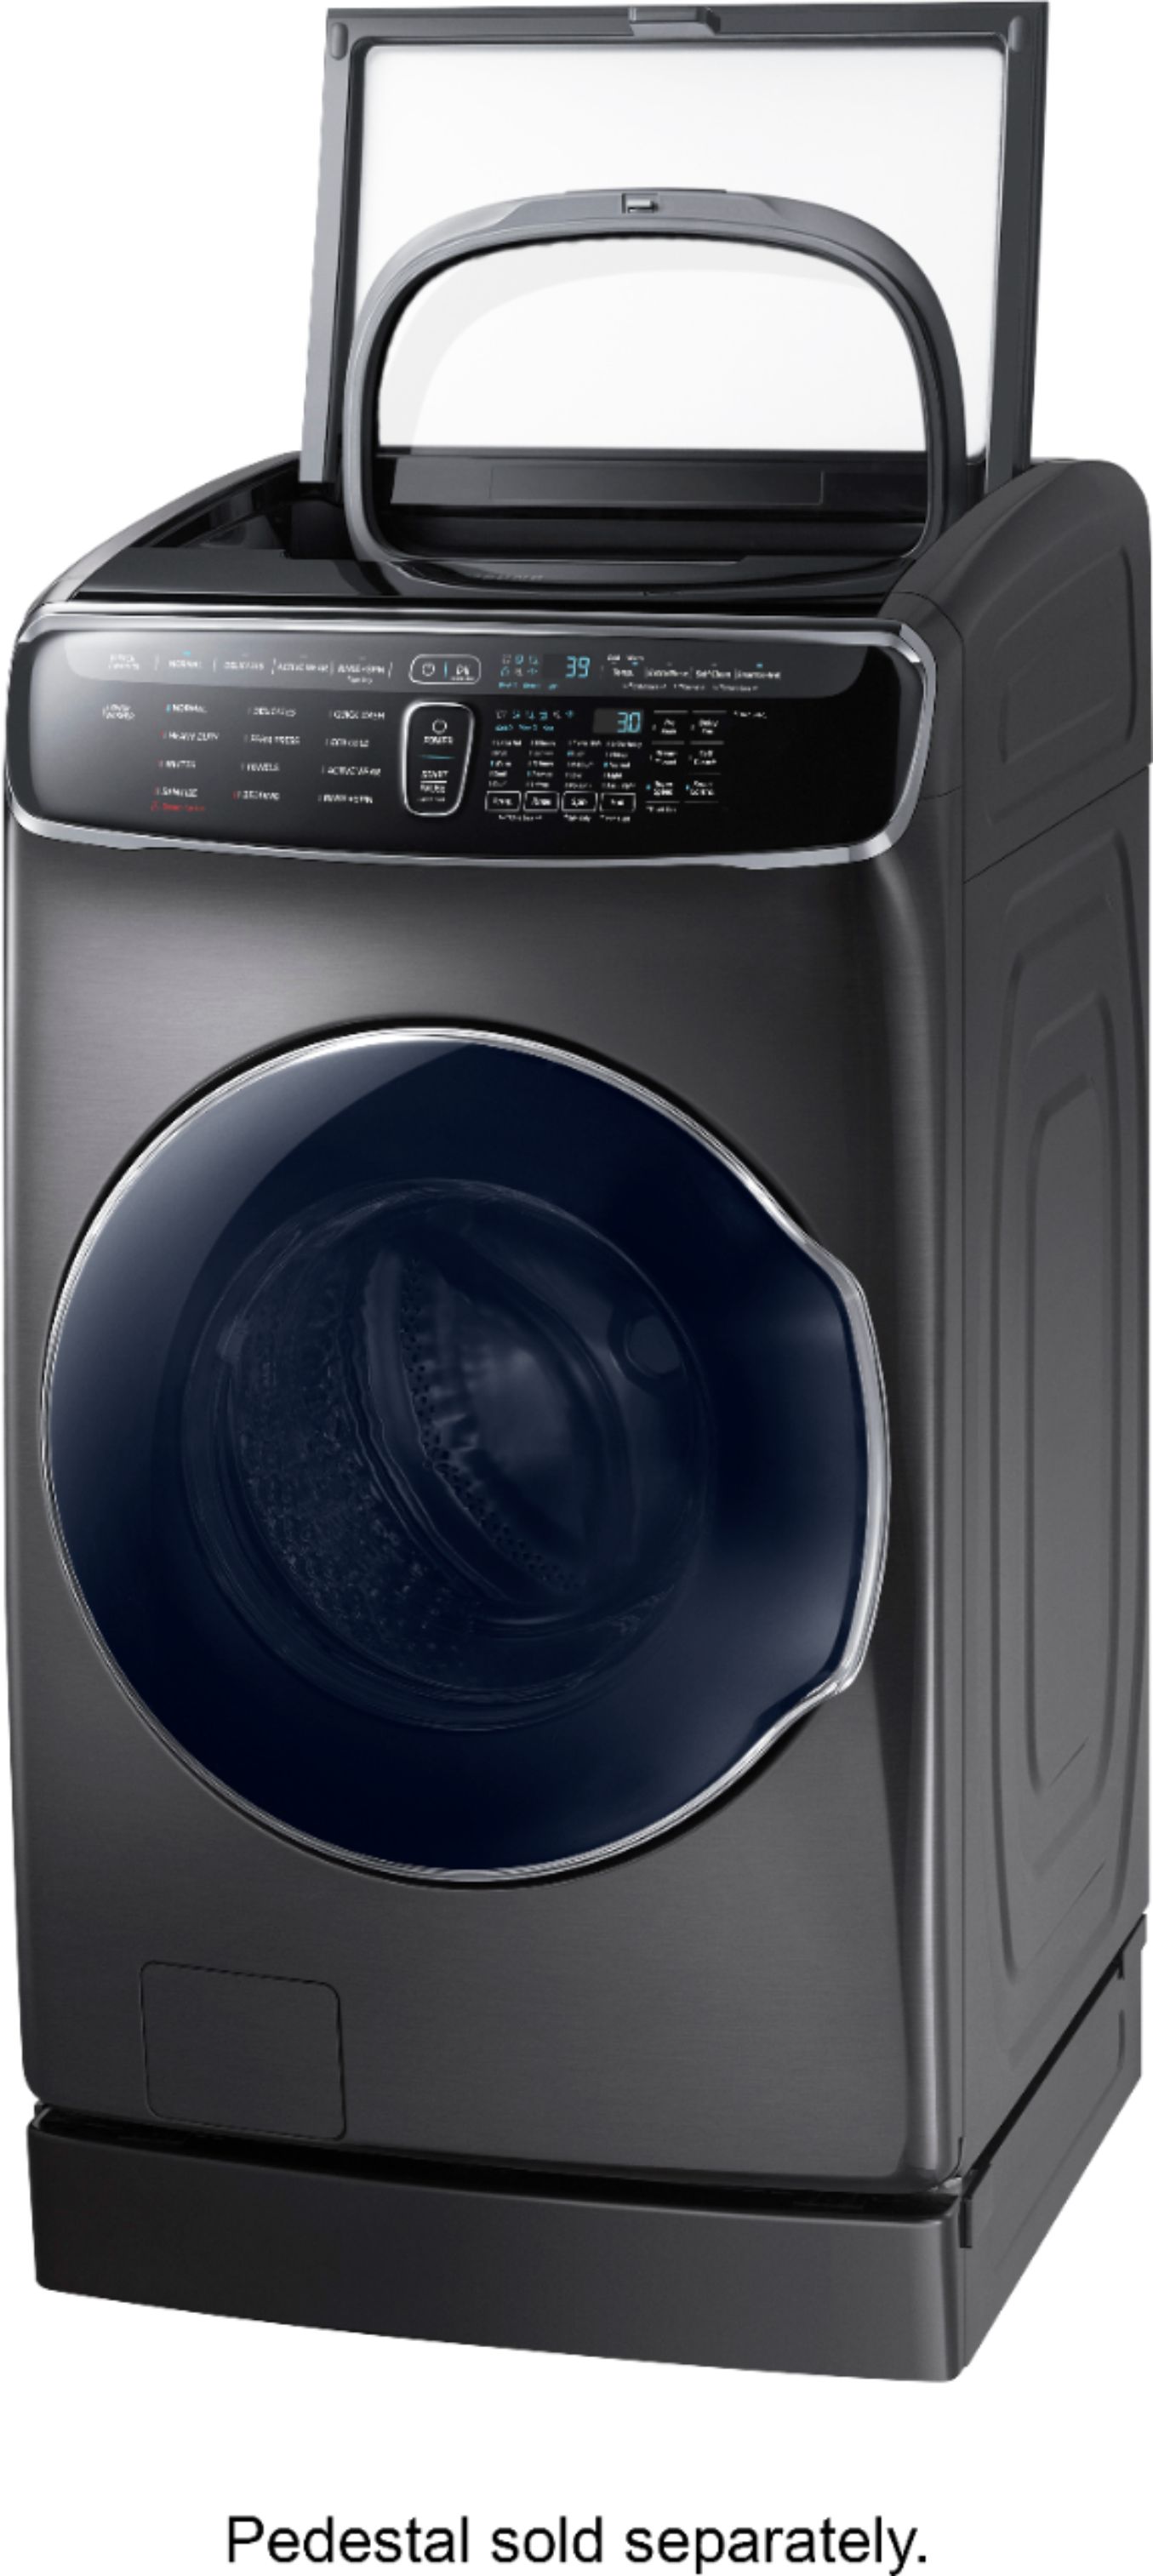 Samsung 6.0 Cu. Ft. High-Efficiency Smart Front Load Washer with